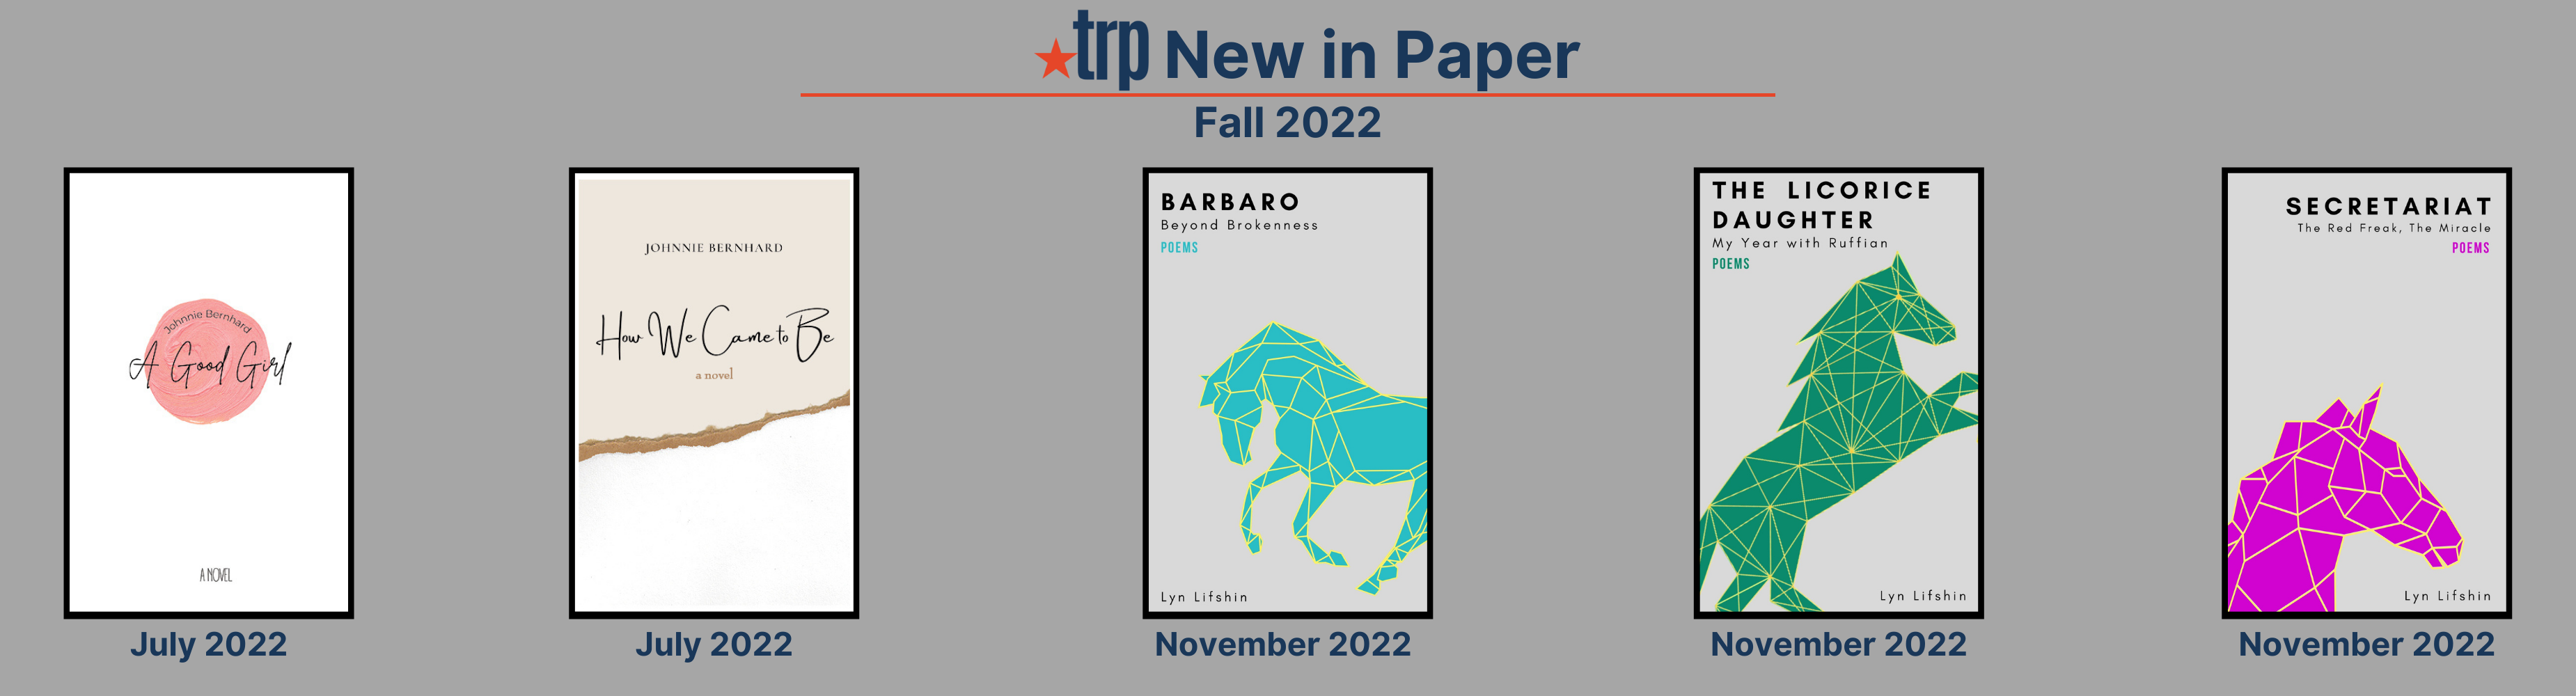 TRP Fall 2022 New in Paper